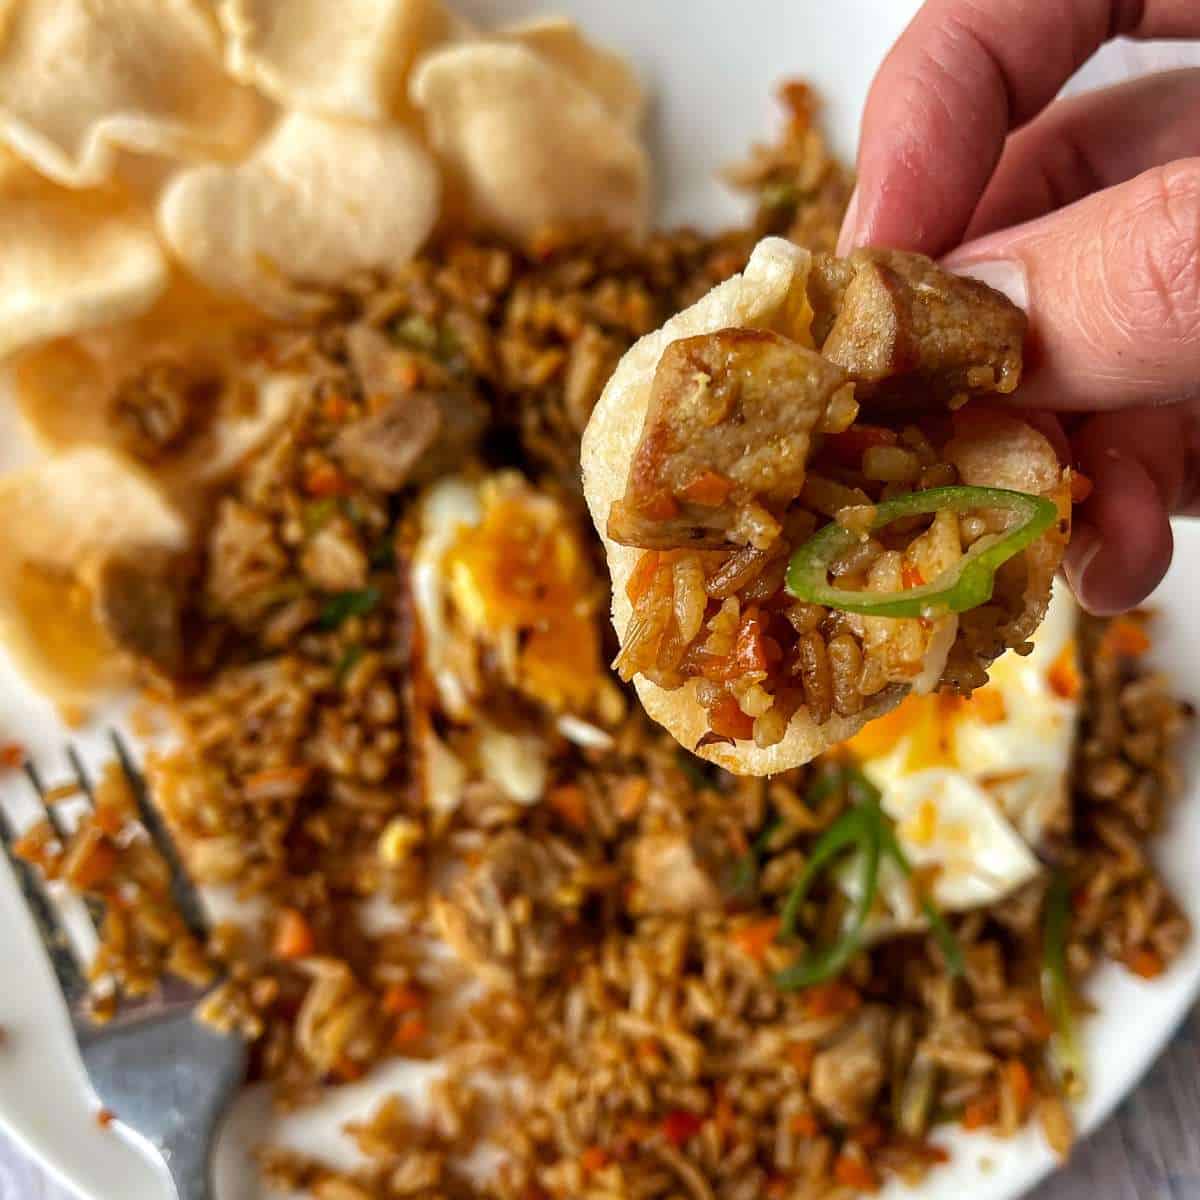 A close up of a prawn cracker with Nasi Goreng scooped up inside it.